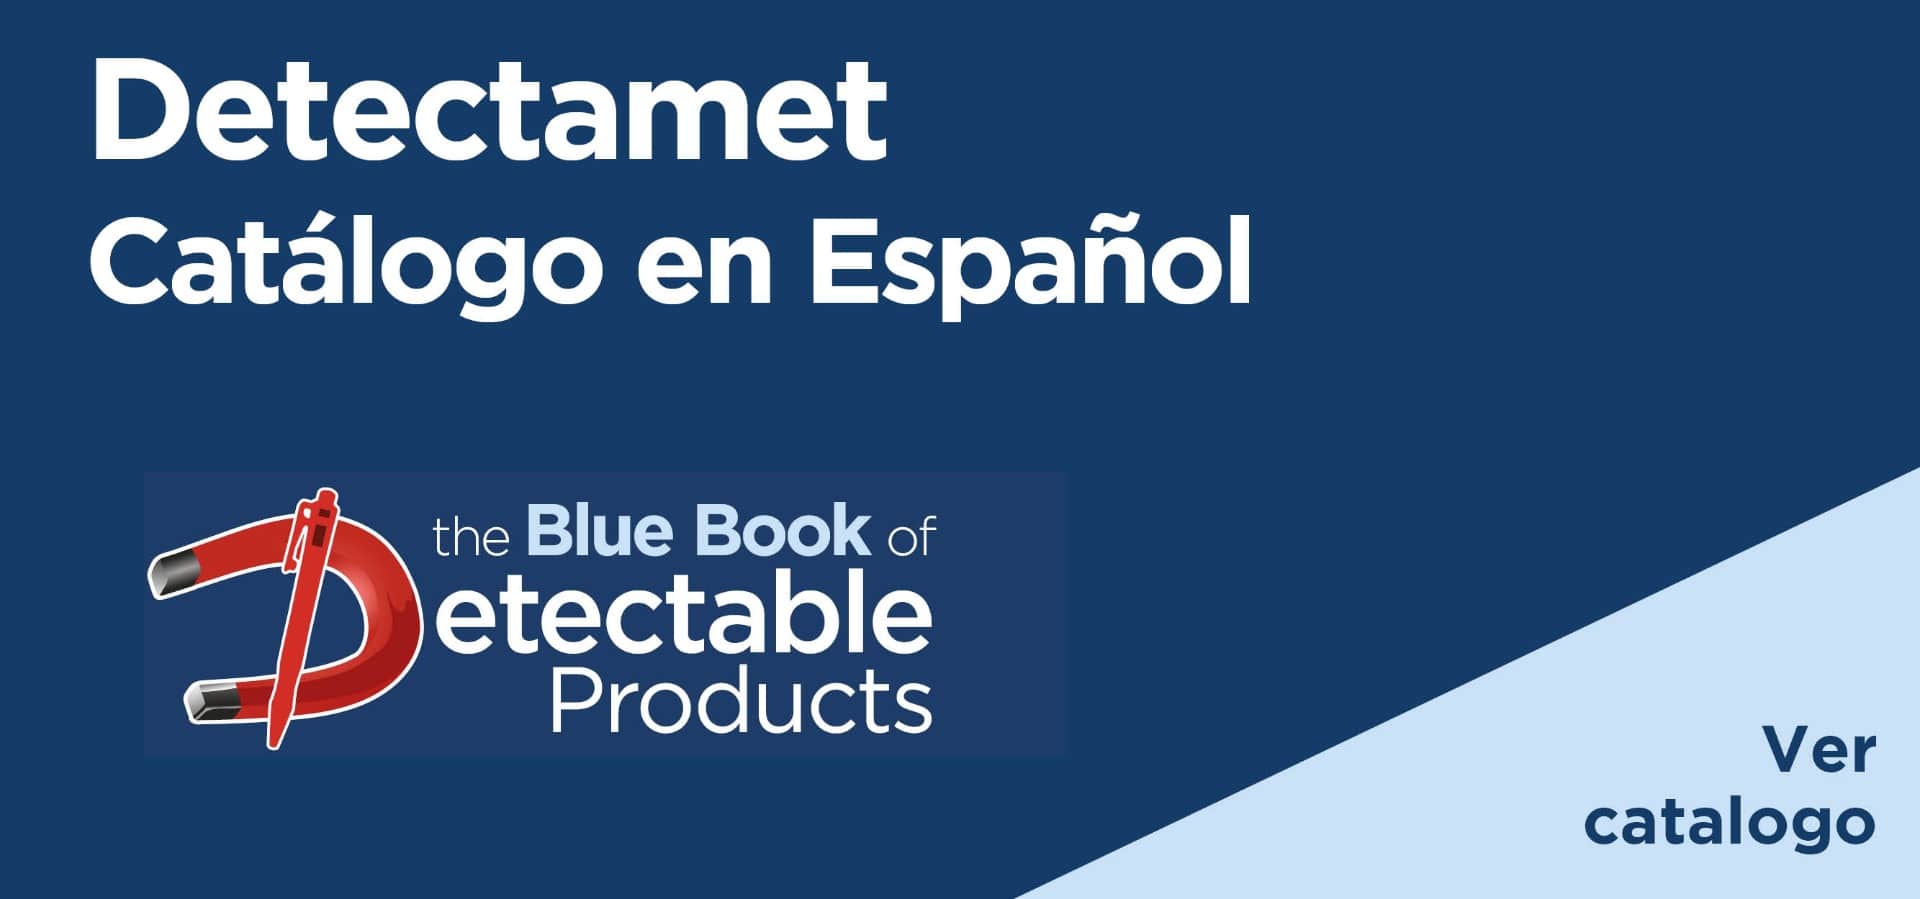 The Blue Book of Detectable Products - Detectamet Product Catalogue